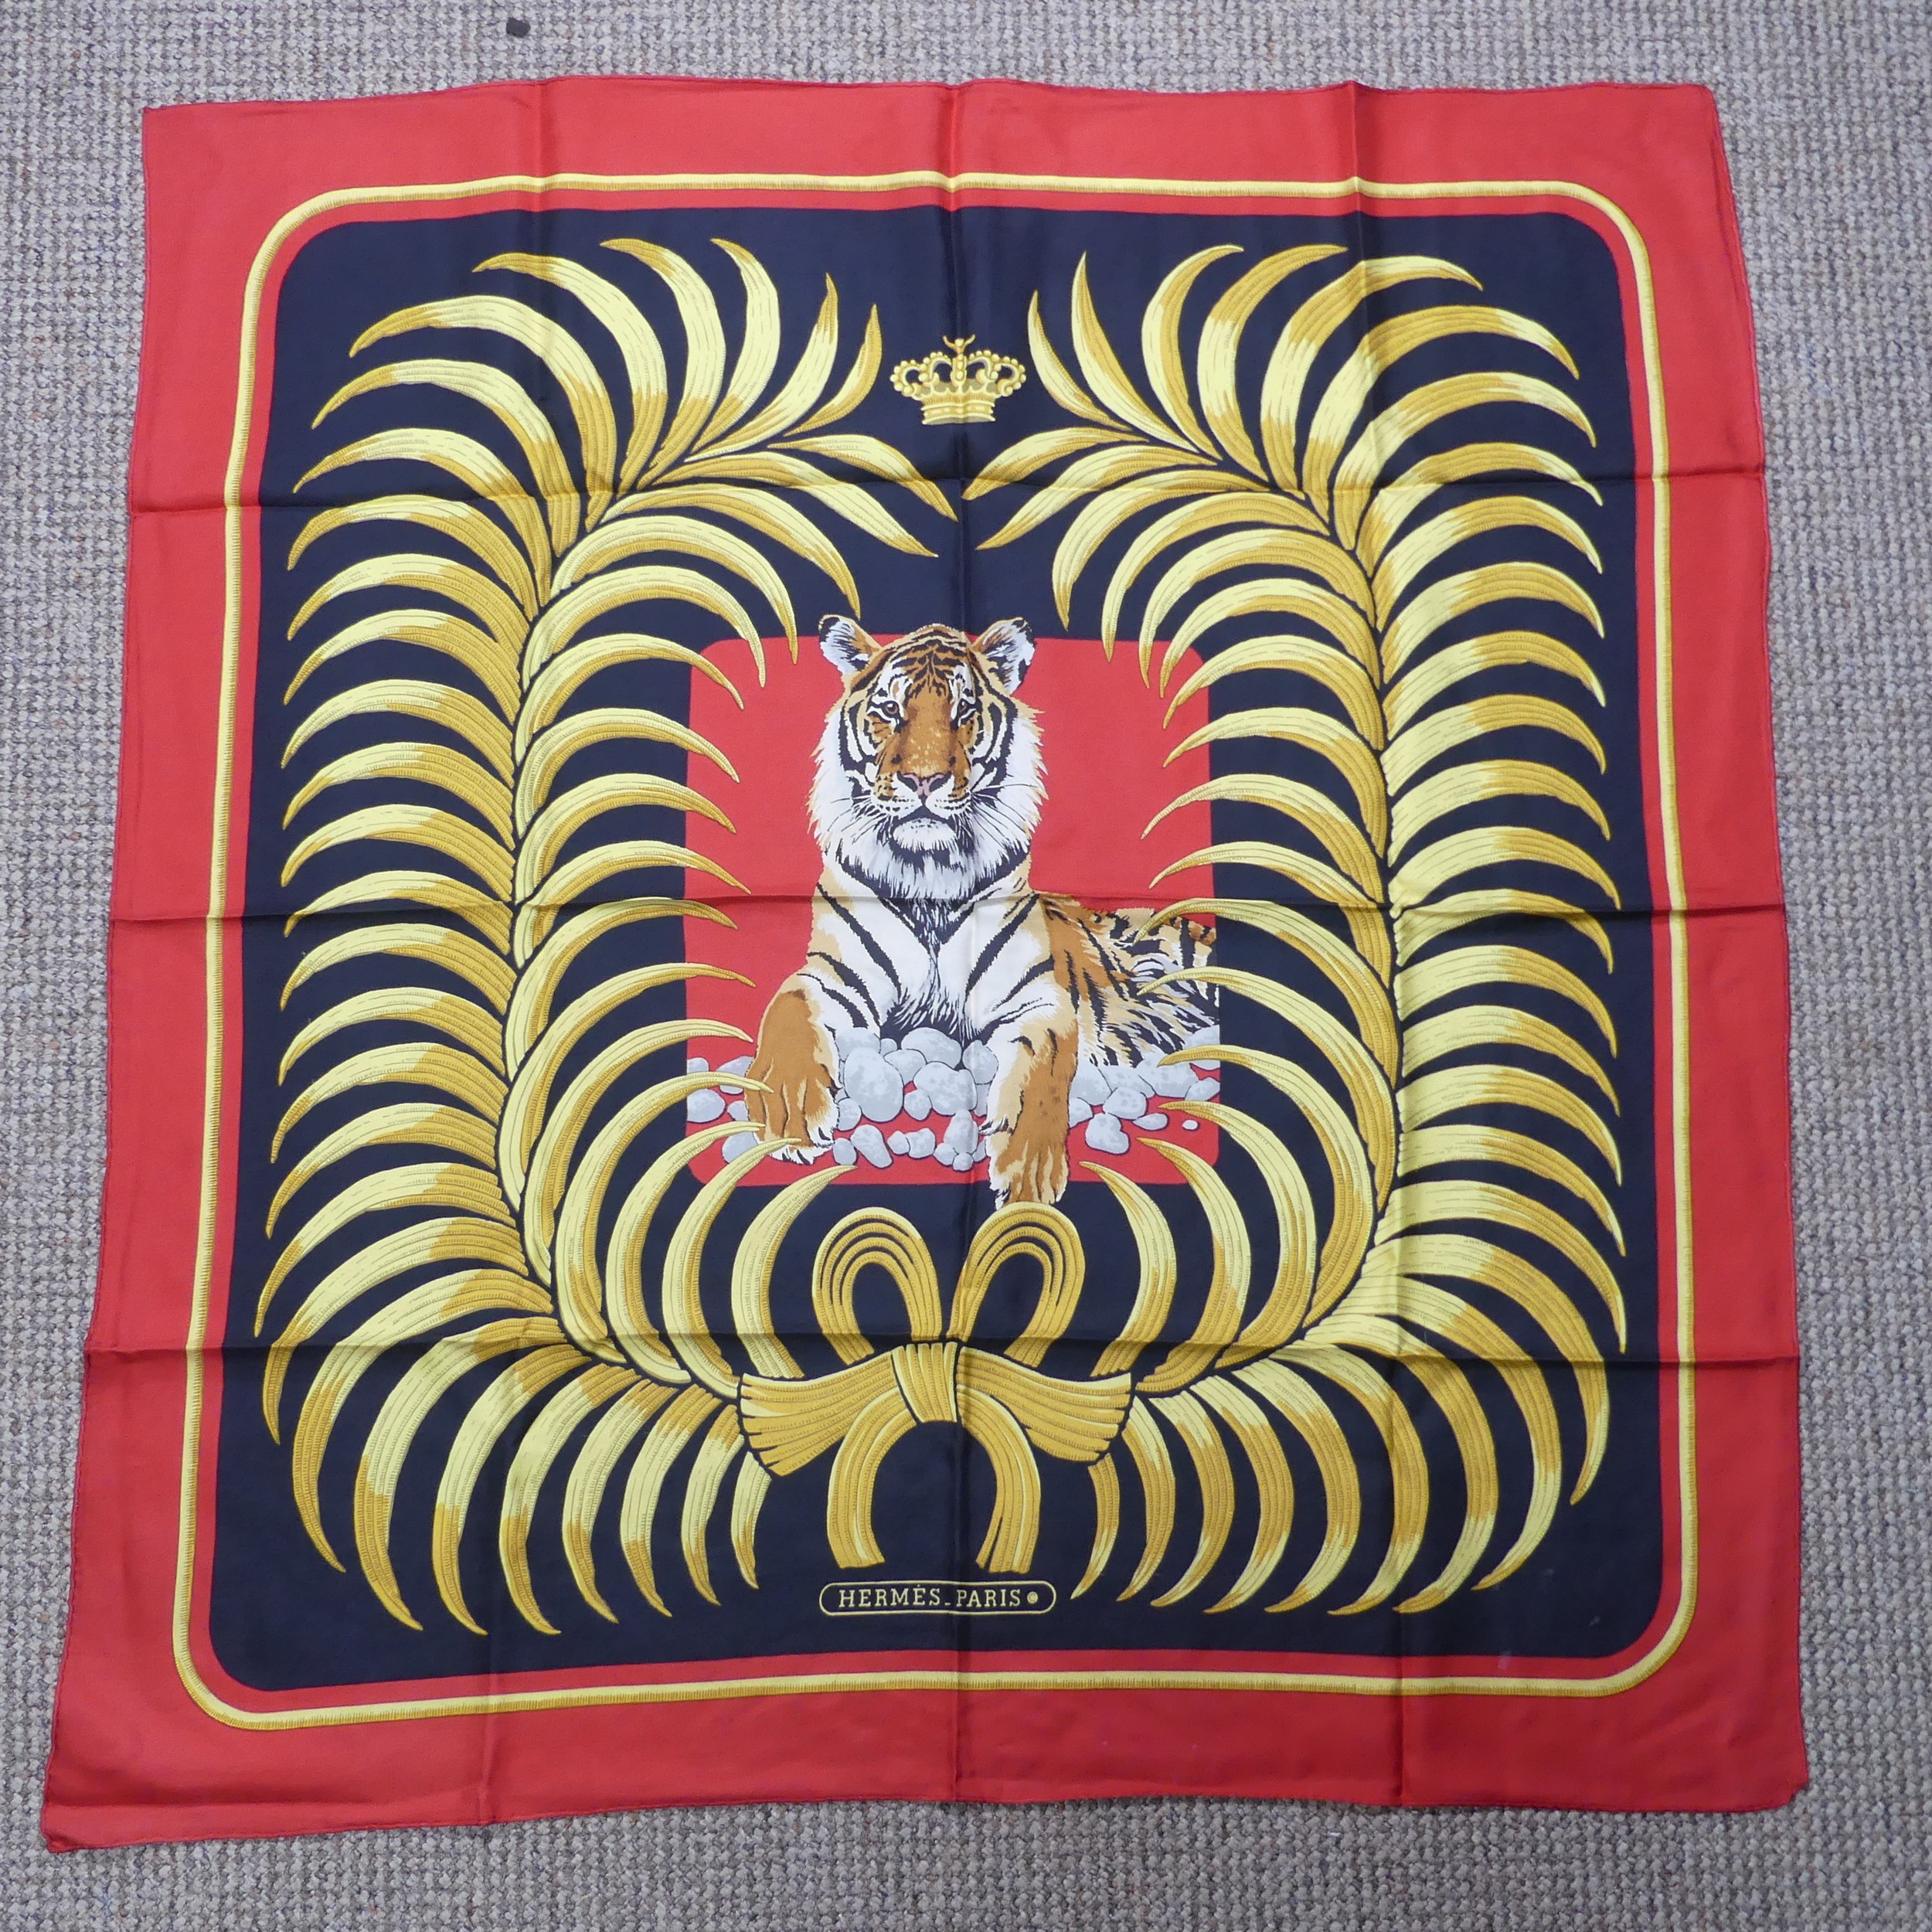 A Hermès silk twill scarf: Royal Tiger design, gold and black on red ground, hand rolled edges,